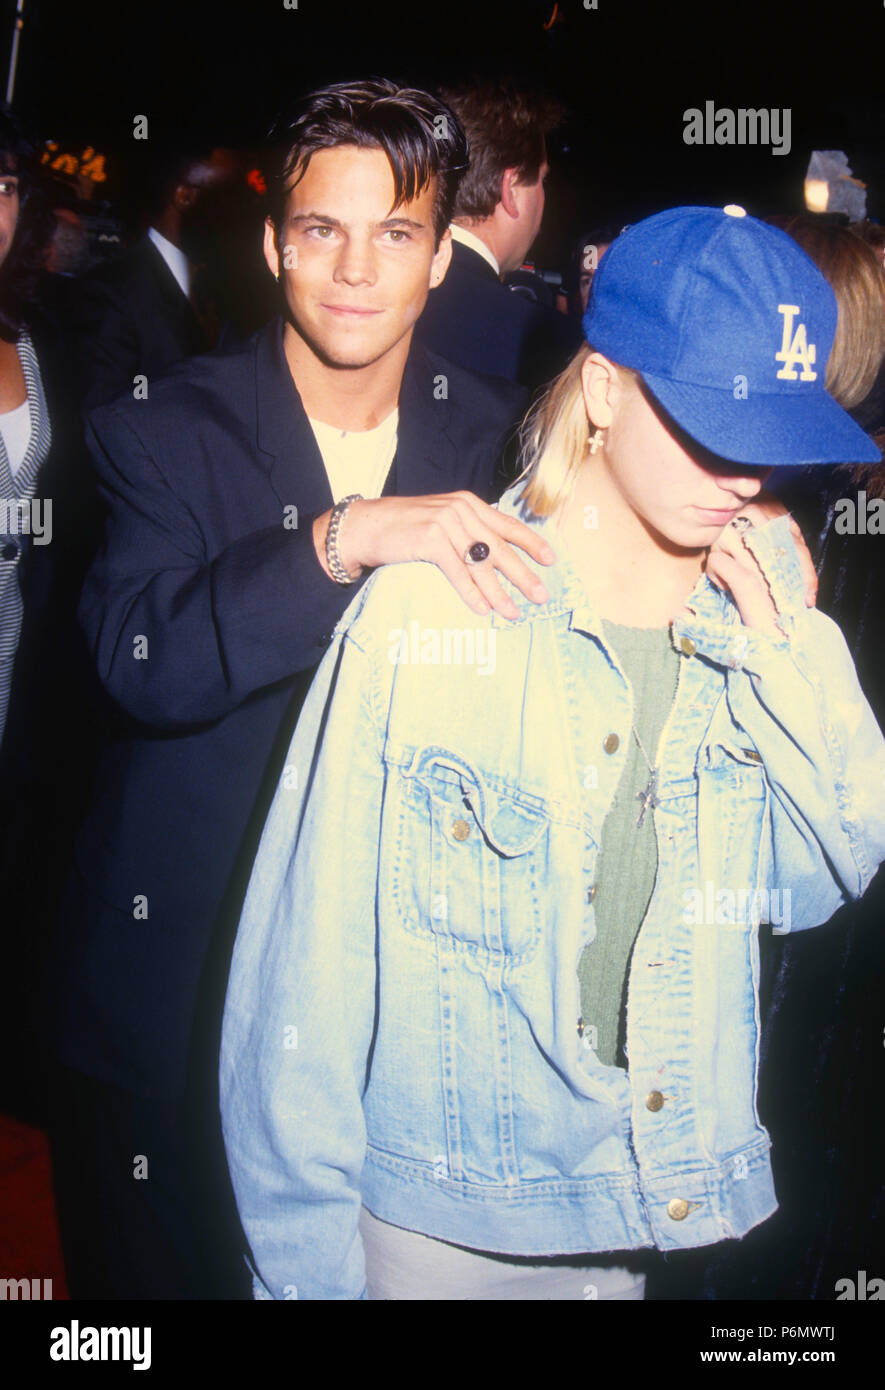 WESTWOOD, CA - DECEMBER 17: (L-R) Actor Stephen Dorff and actress Courtney Wagner attend the 'JFK' Westwood Premiere on December 17, 1991 at Mann Village Theatre in Westwood, California. Photo by Barry King/Alamy Stock Photo Stock Photo